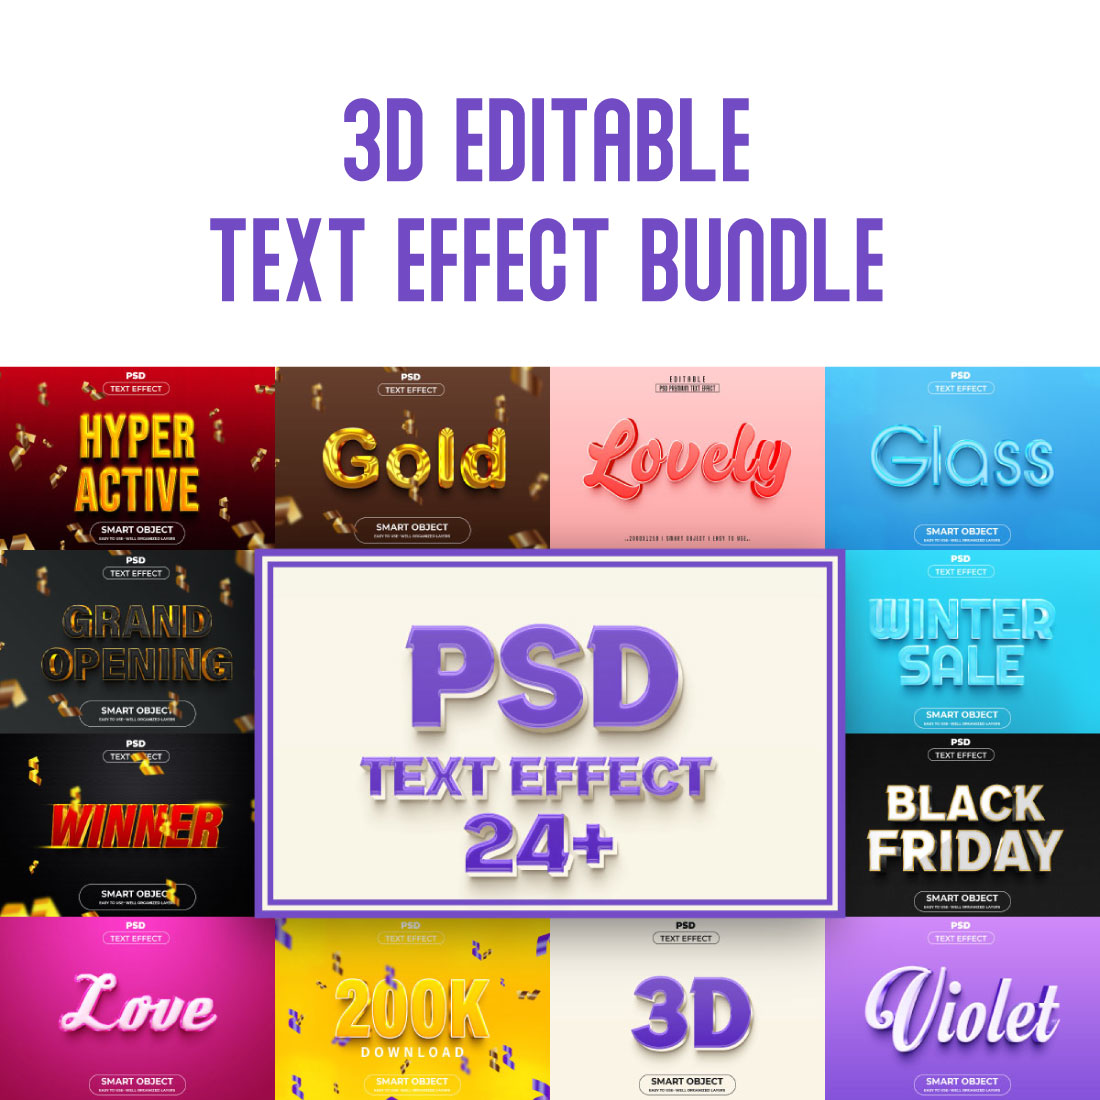 3D Text Effect Style Bundle Template cover image.